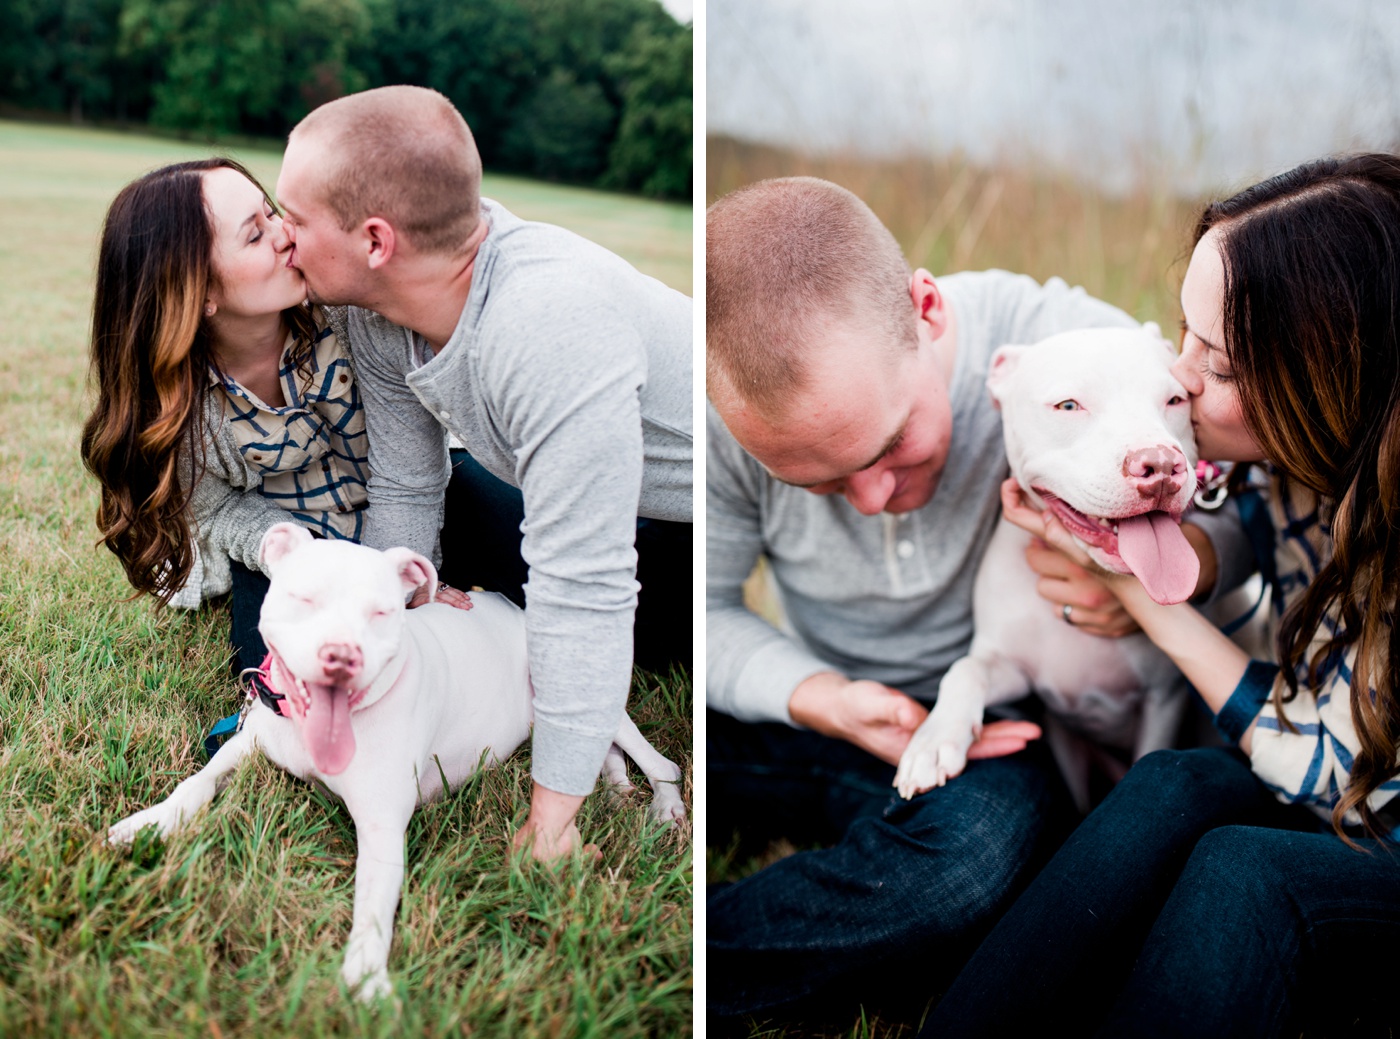 White Pit Bull Mix - Valley Forge National Park Anniversary Session - Philadelpha Pennsylvania Portrait Photographer - Alison Dunn Photography photo